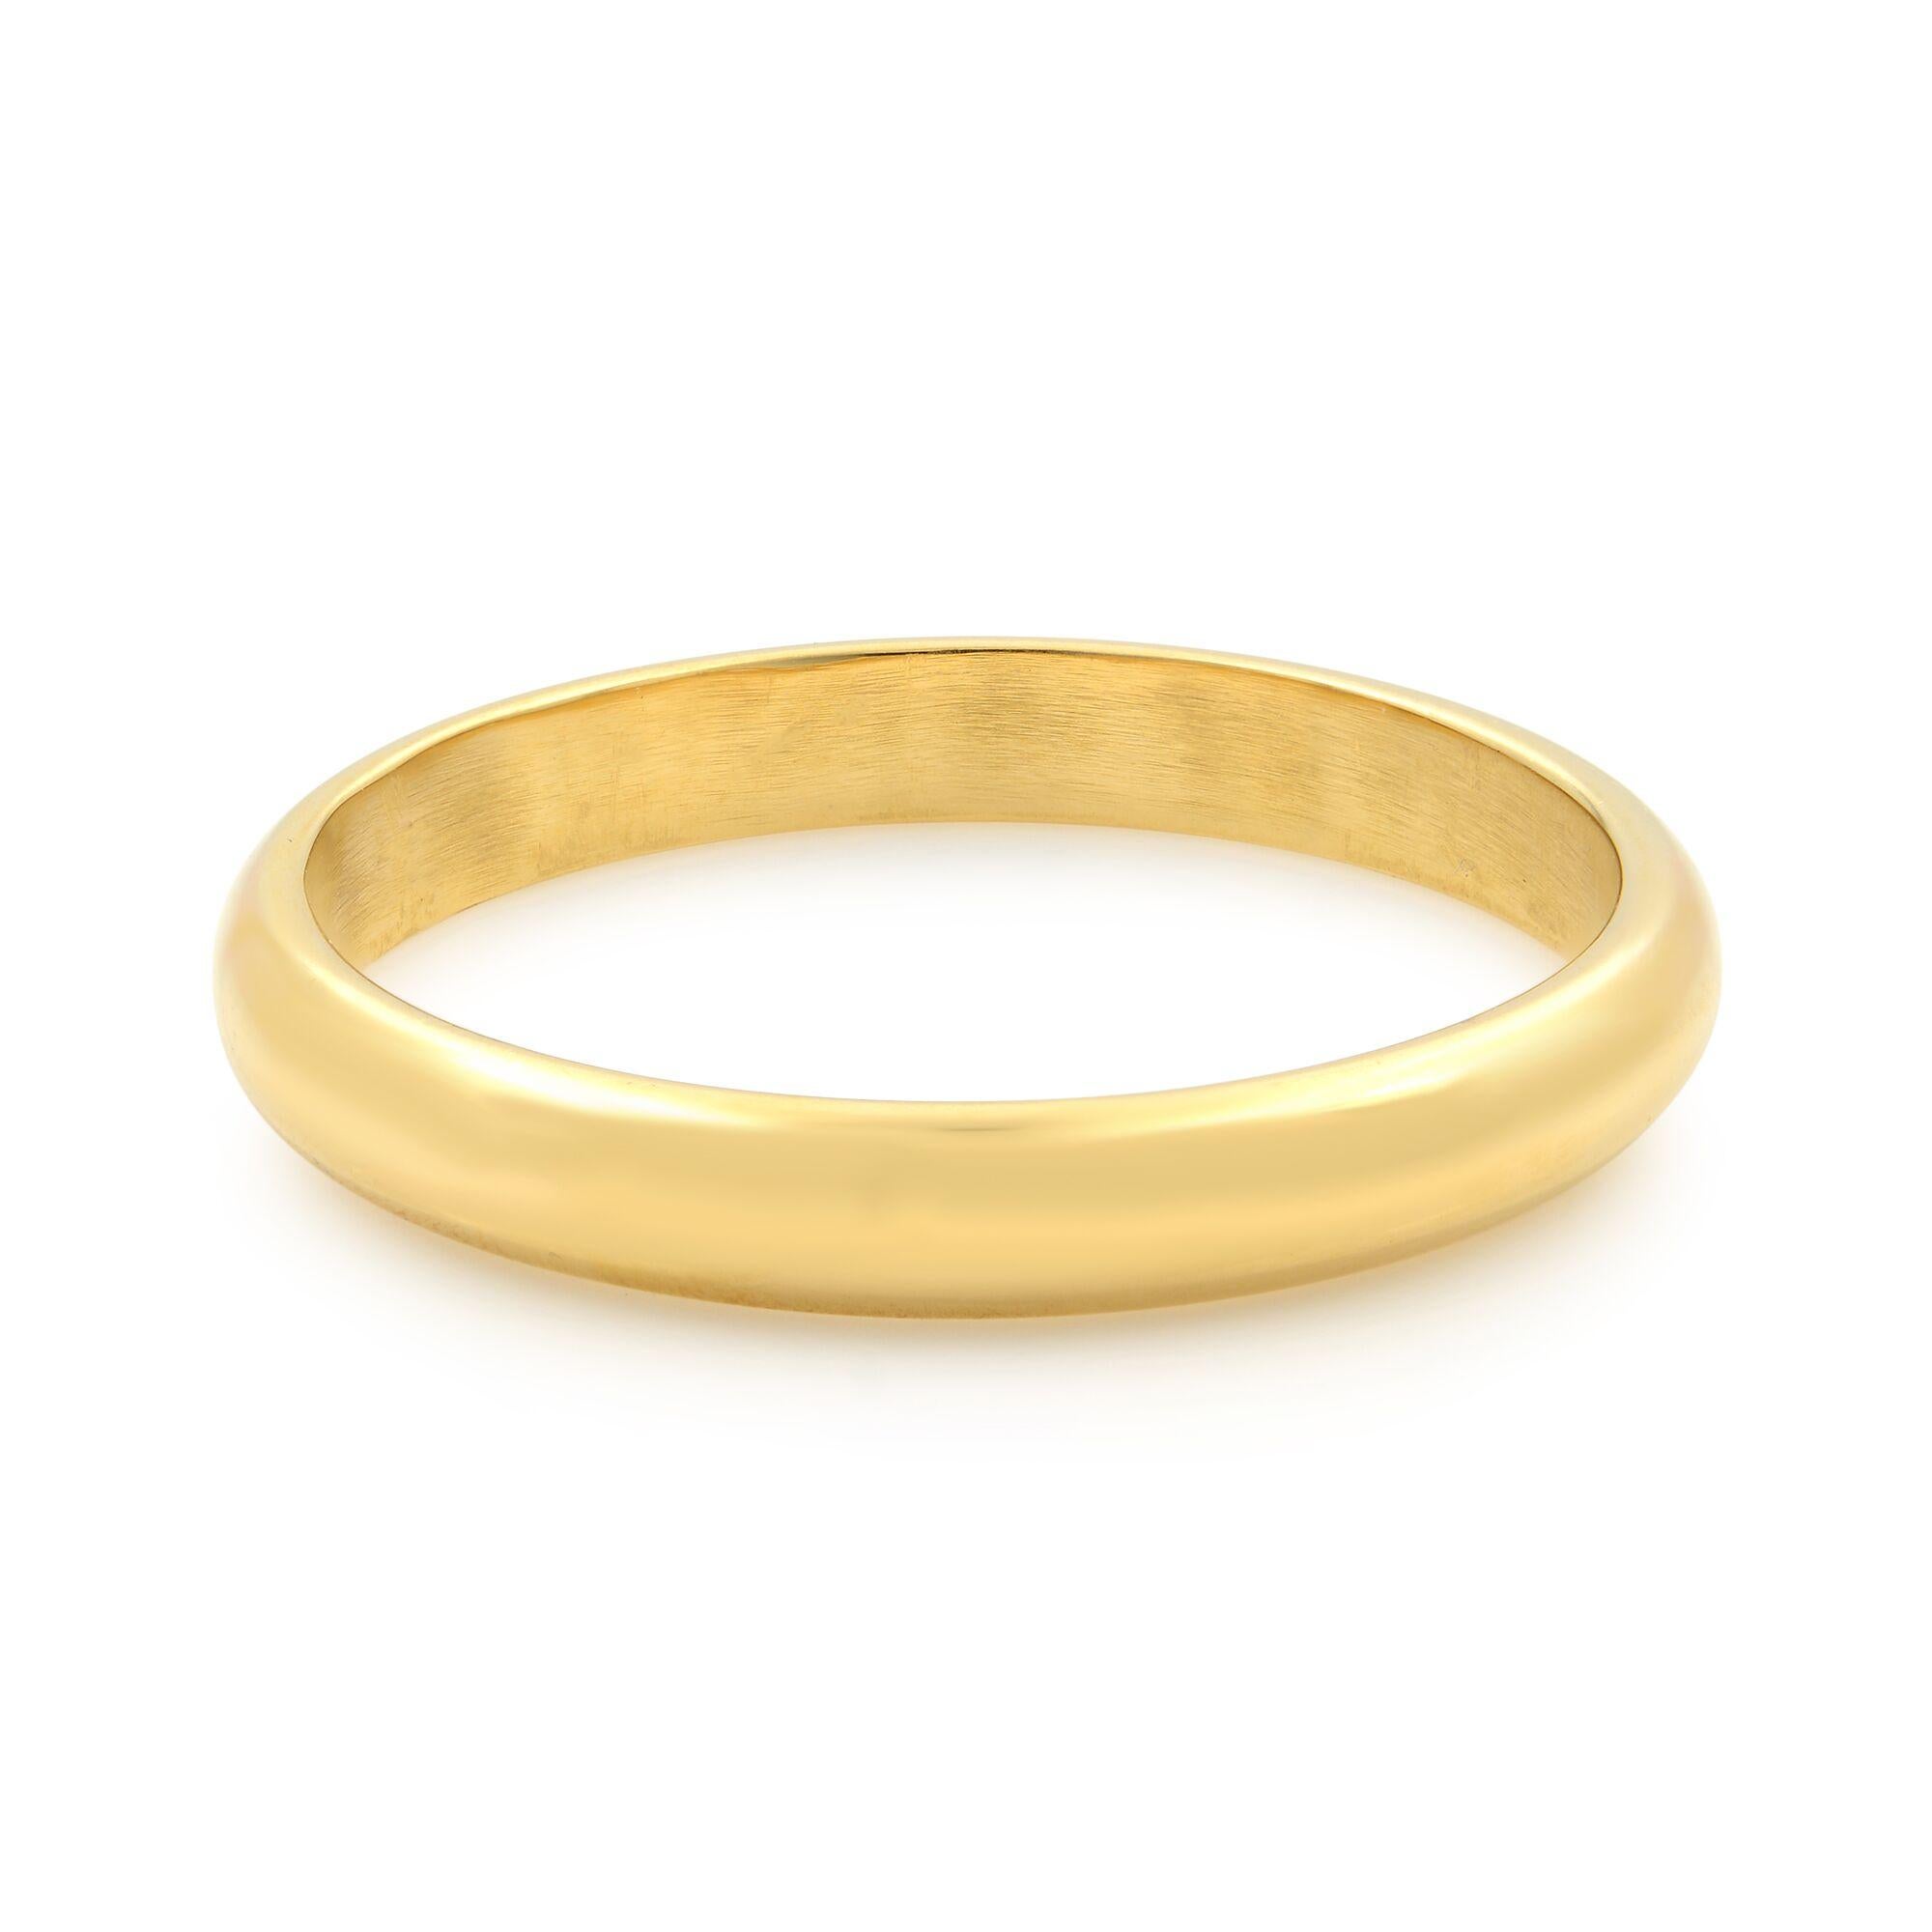 Cartier 1895 men's wedding band, width 3.5 mm, 18K yellow gold. Hallmarked. Ring Size: 12.5.
Condition: Pre-owned, like new. No original box and no papers. Comes in our presentation box. 